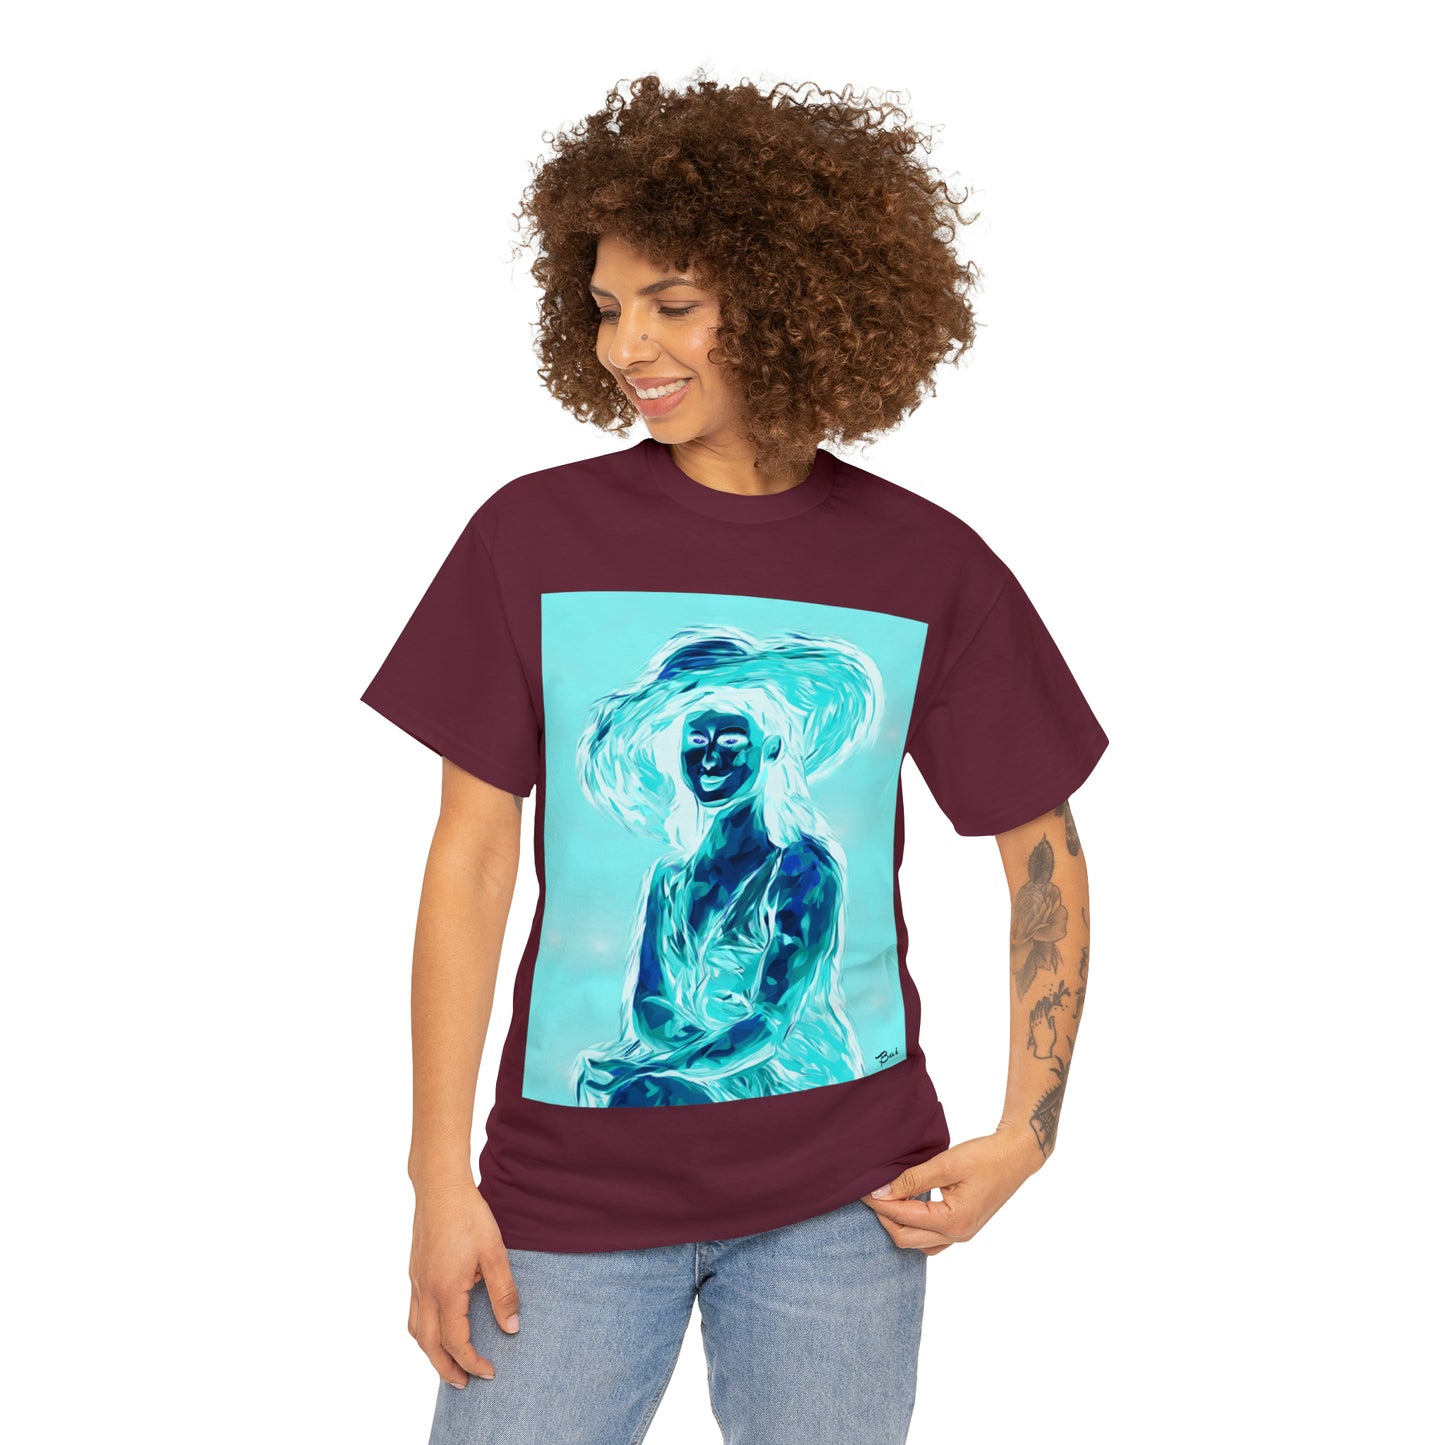 LADY IN SUN HAT (an Inversion in Red) - Airt on a Shirt  - Unisex Heavy Cotton Tee - AUS